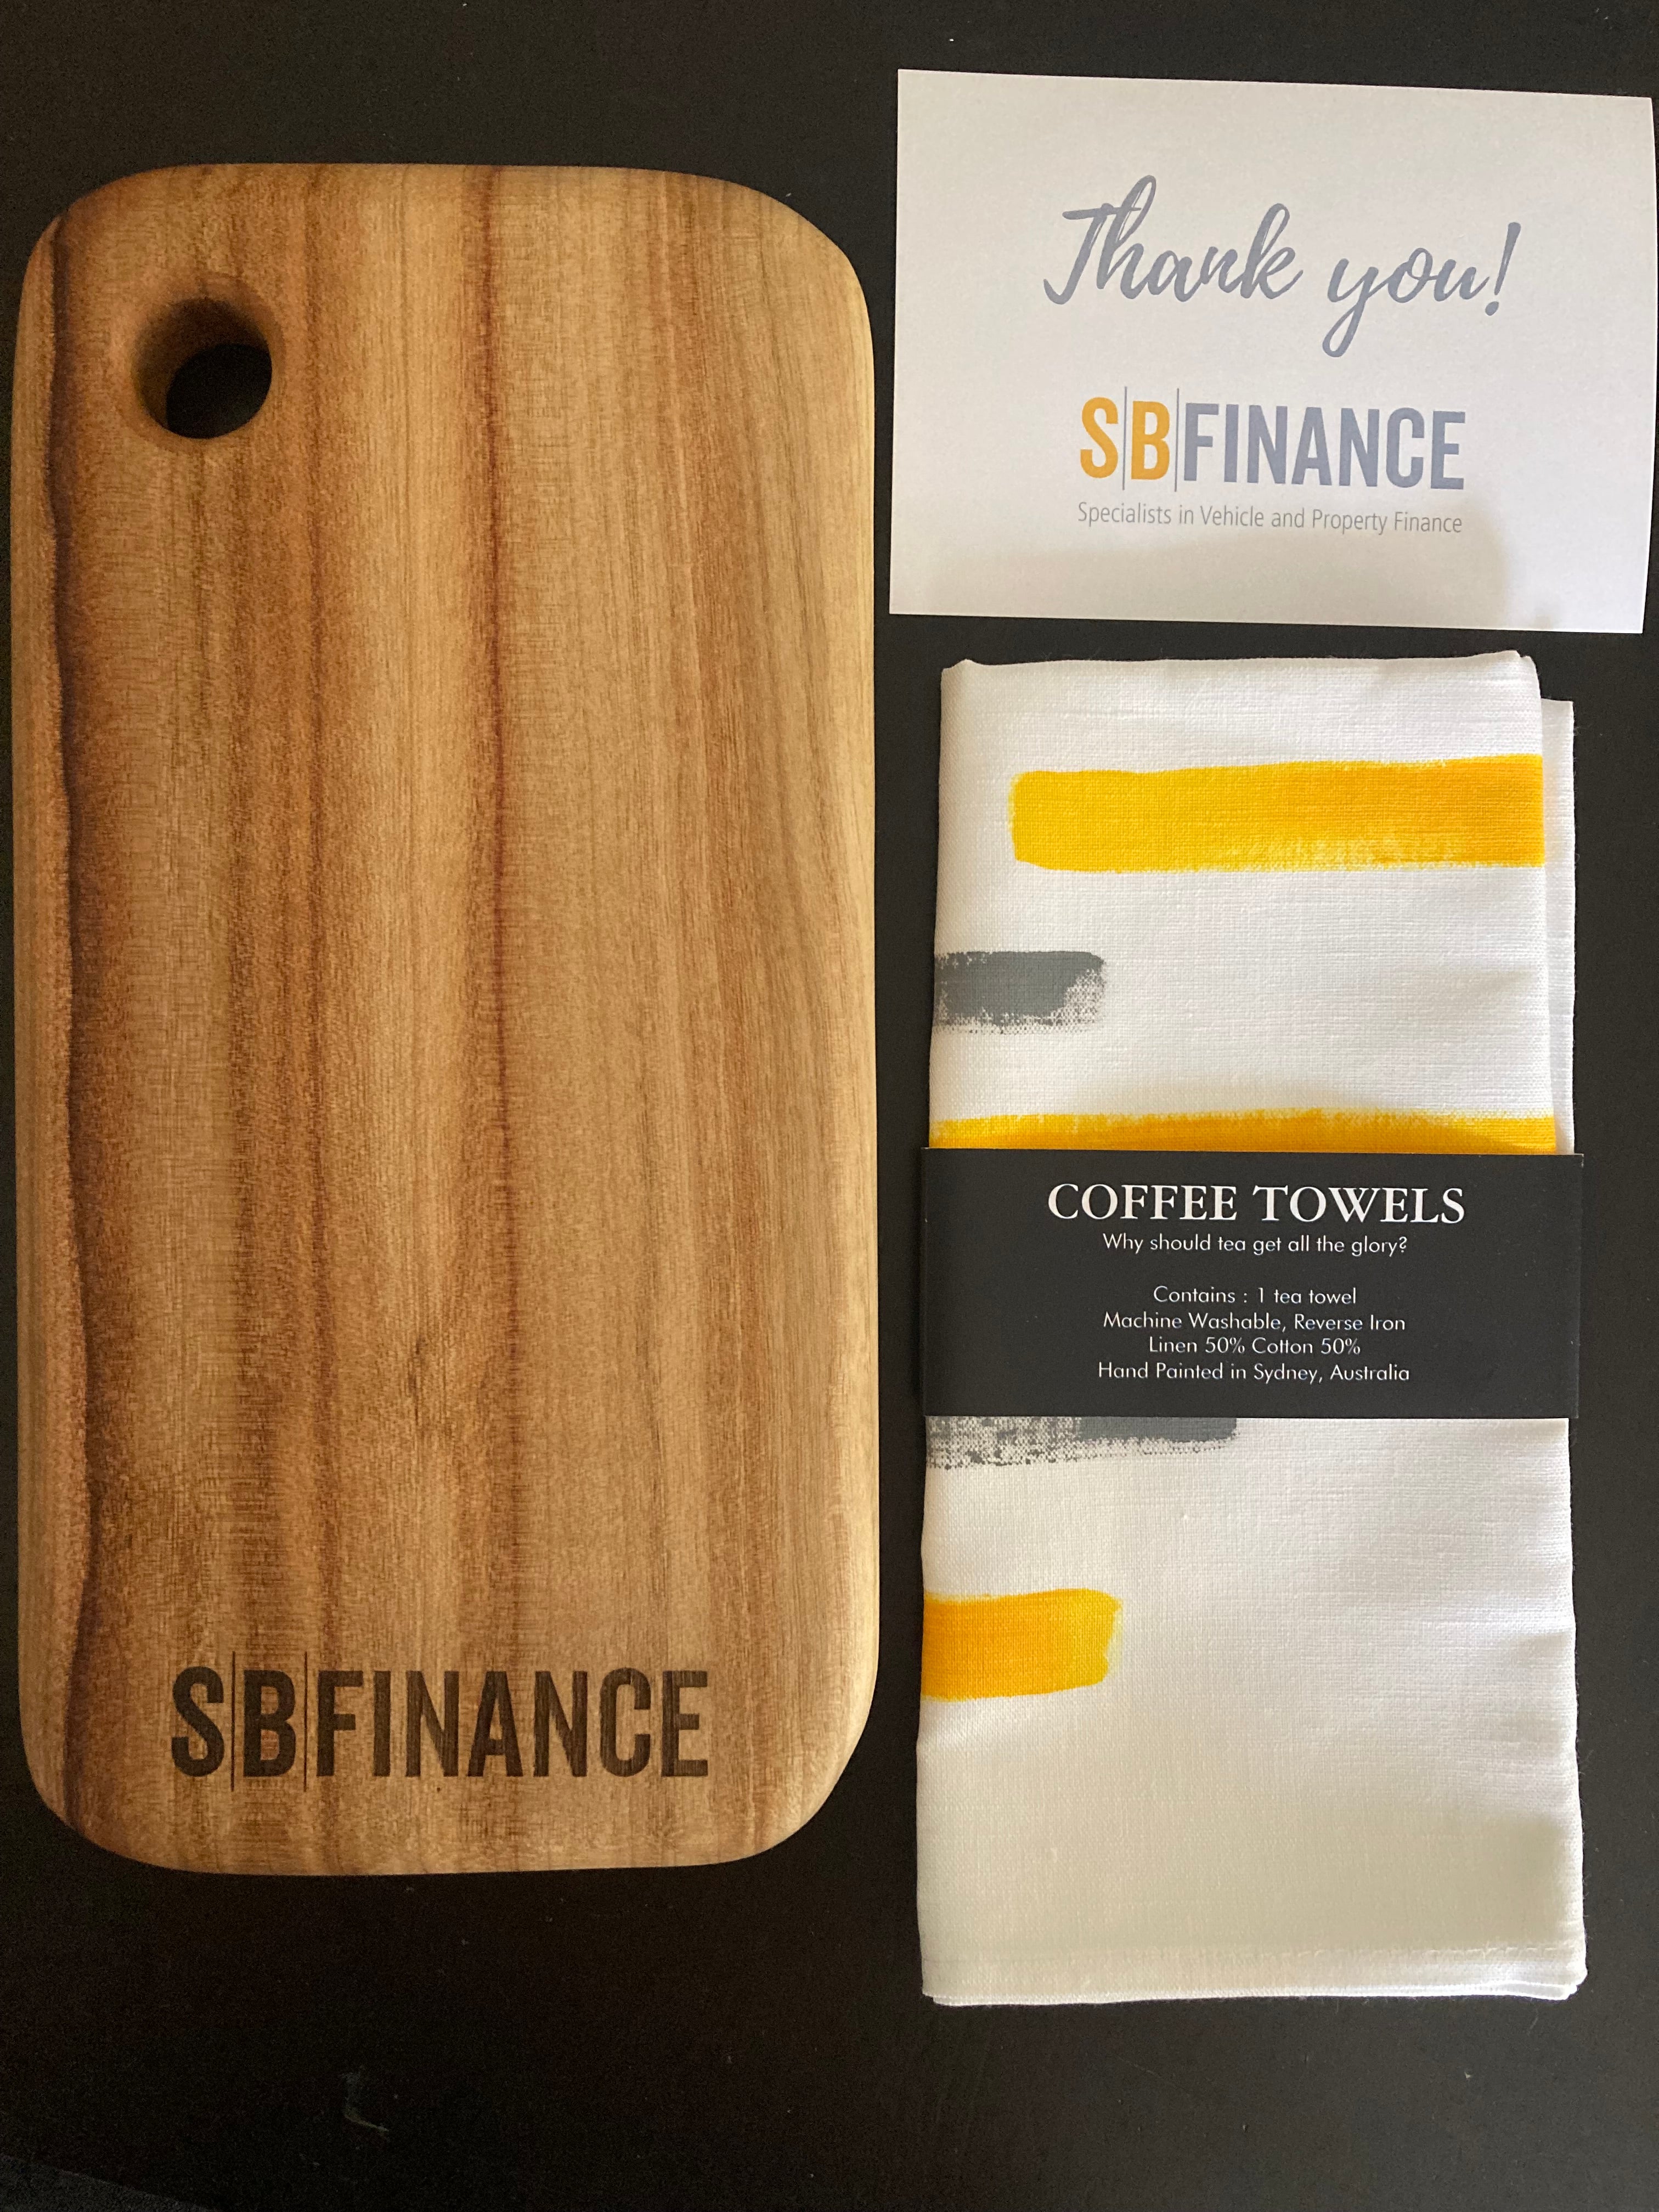 Branded Cheese board, with branded gift card and painted coffee towel to highlight brand colours